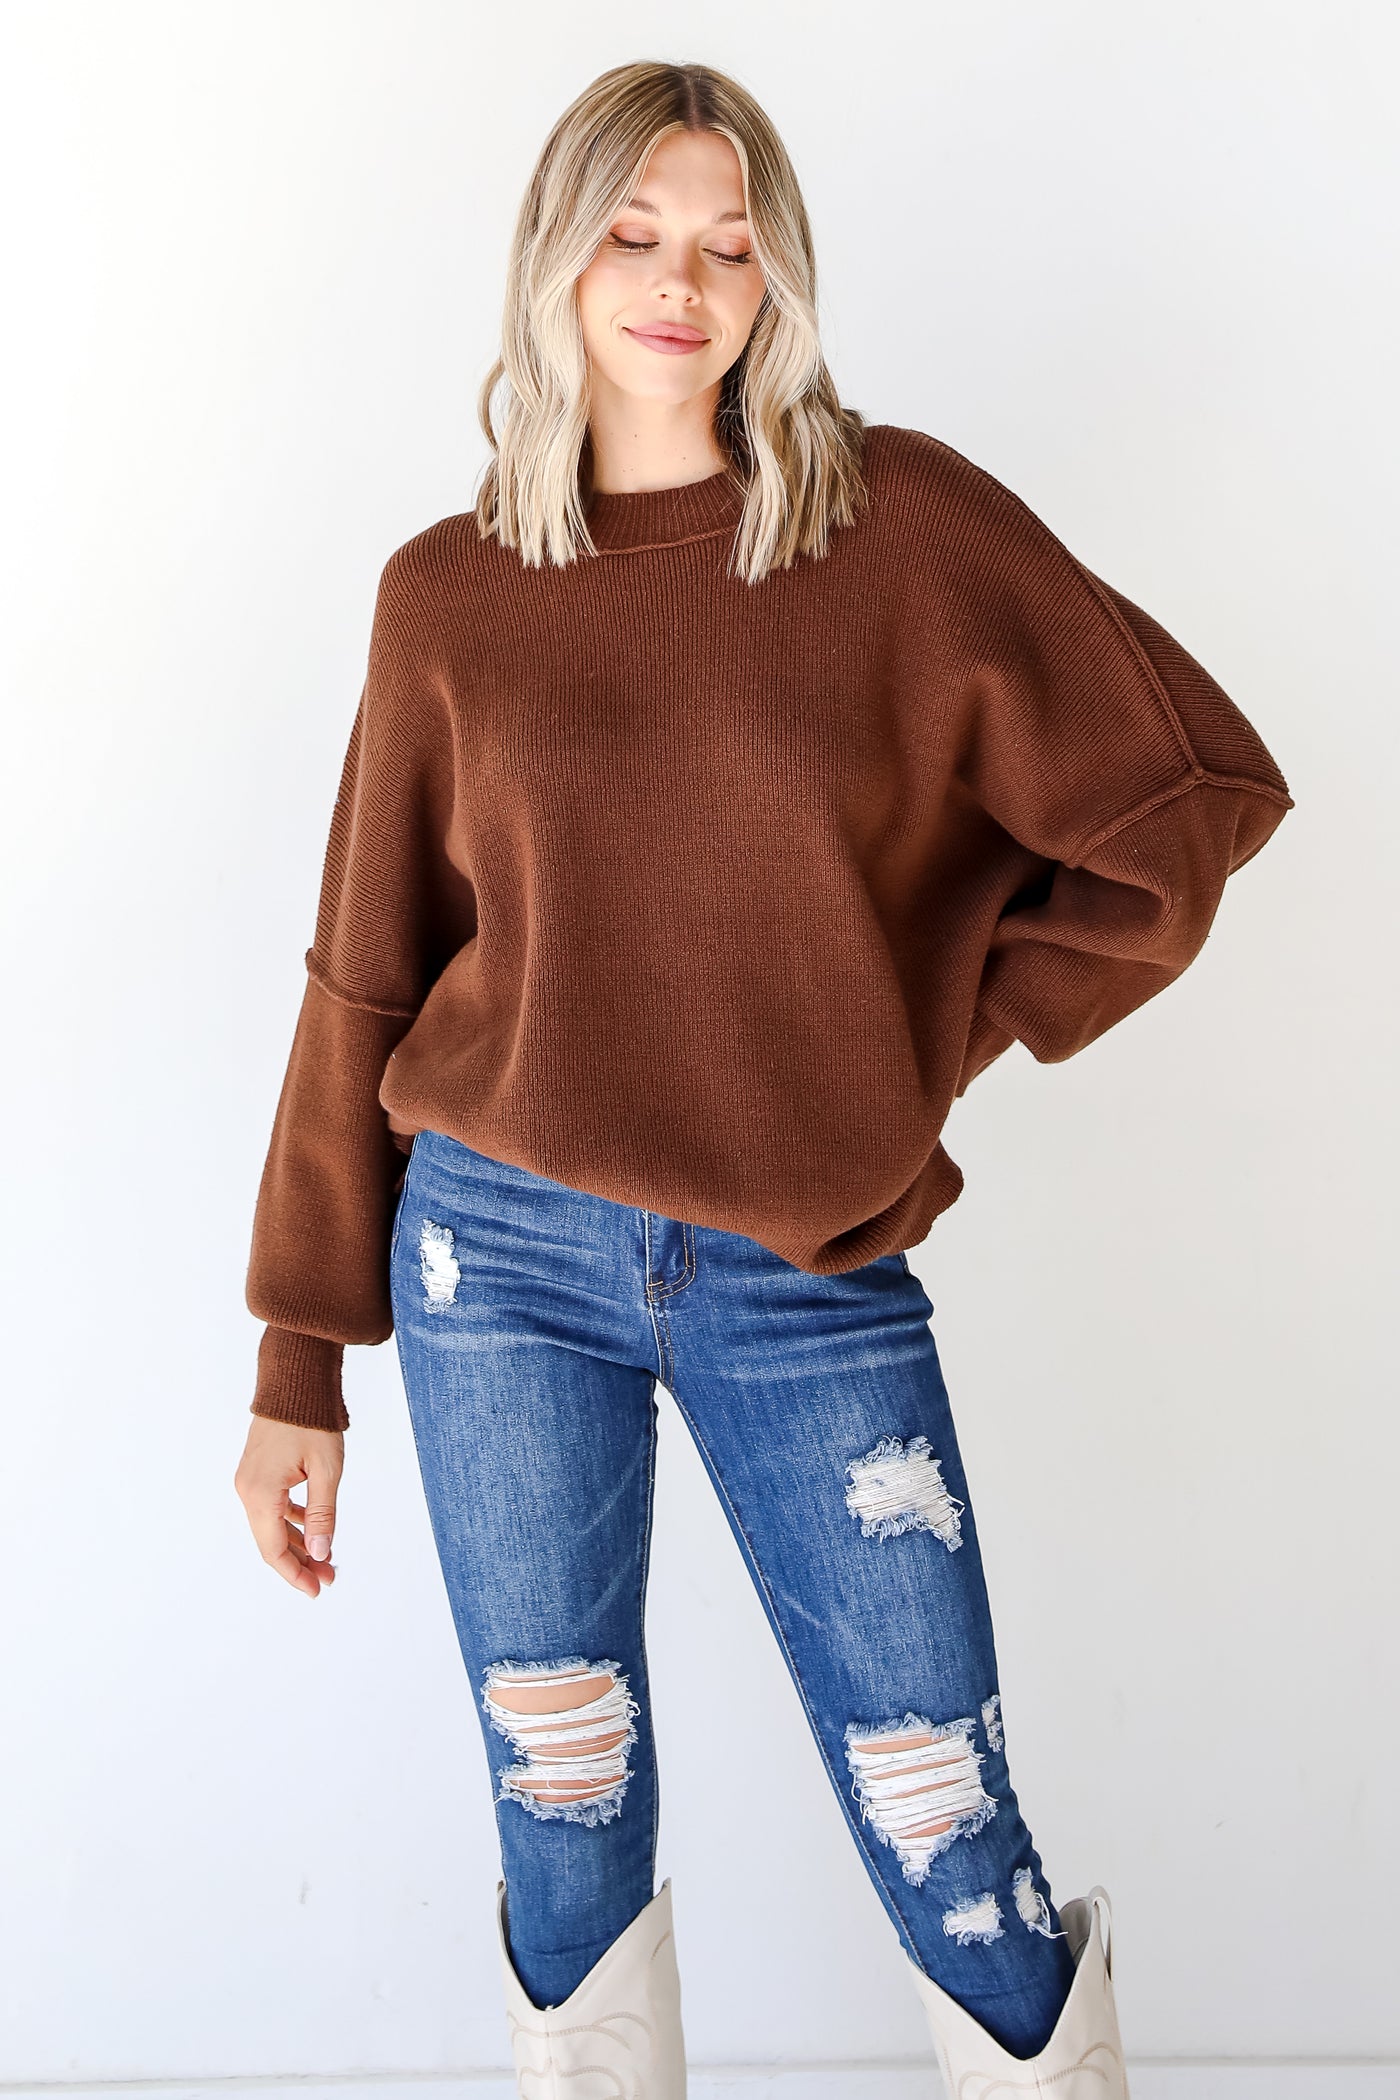 brown oversized sweater front view